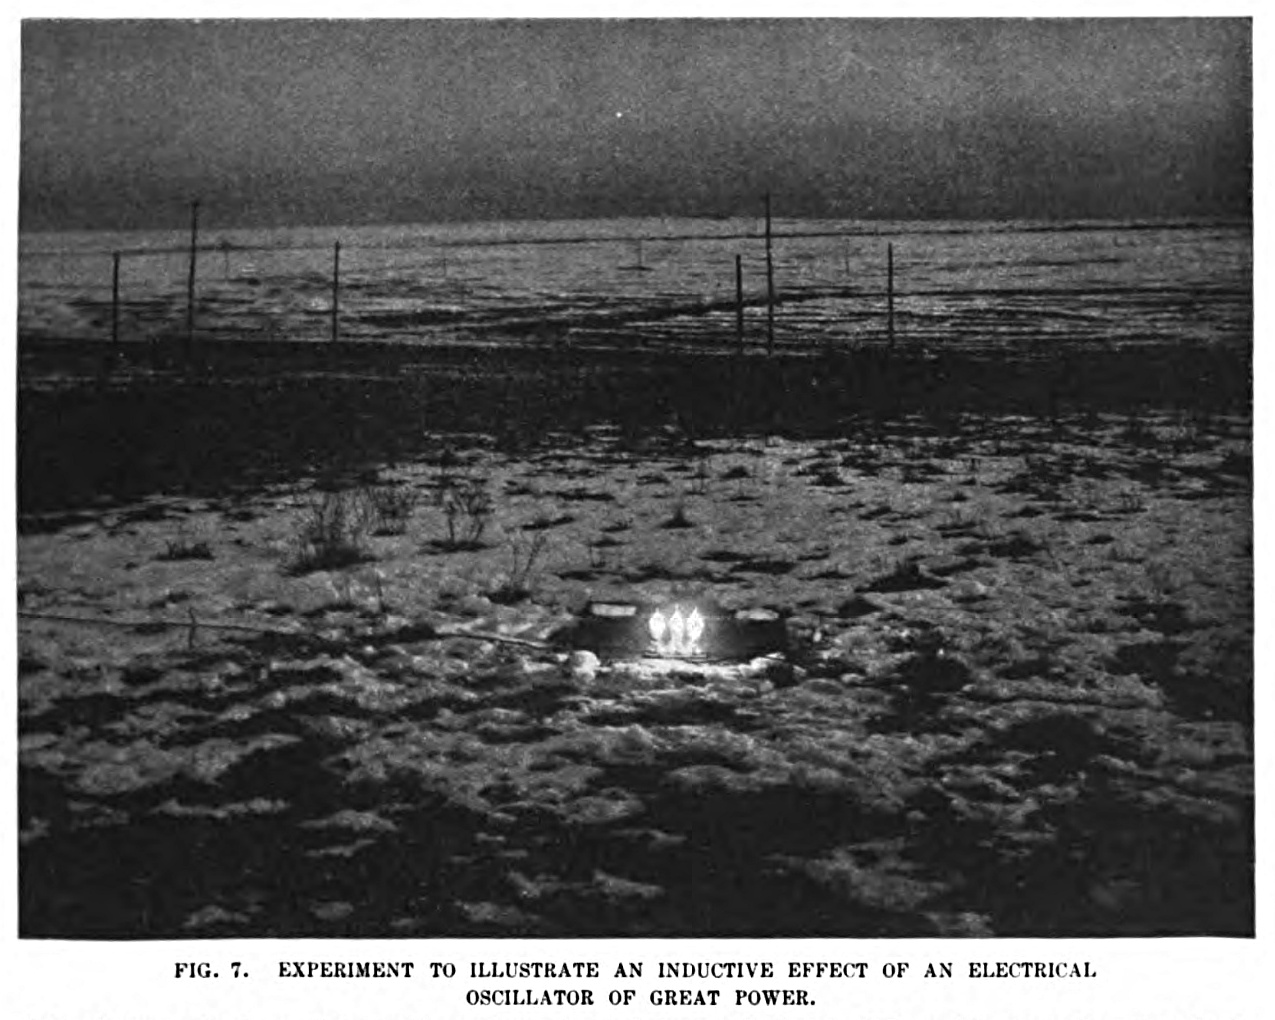 FIG. 7. Experiment to illustrate an inductive effect of an electrical oscillator of great power. The photograph shows three ordinary incandescent lamps lighted to full candle-power by currents induced in a local loop consisting of a single wire forming a square of fifty feet each side, which includes the lamps, and which is at a distance of one hundred feet from the primary circuit energized by the oscillator. The loop likewise includes an electrical condenser, and is exactly attuned to the vibrations of the oscillator, which is worked at less than five per cent. of its total capacity.